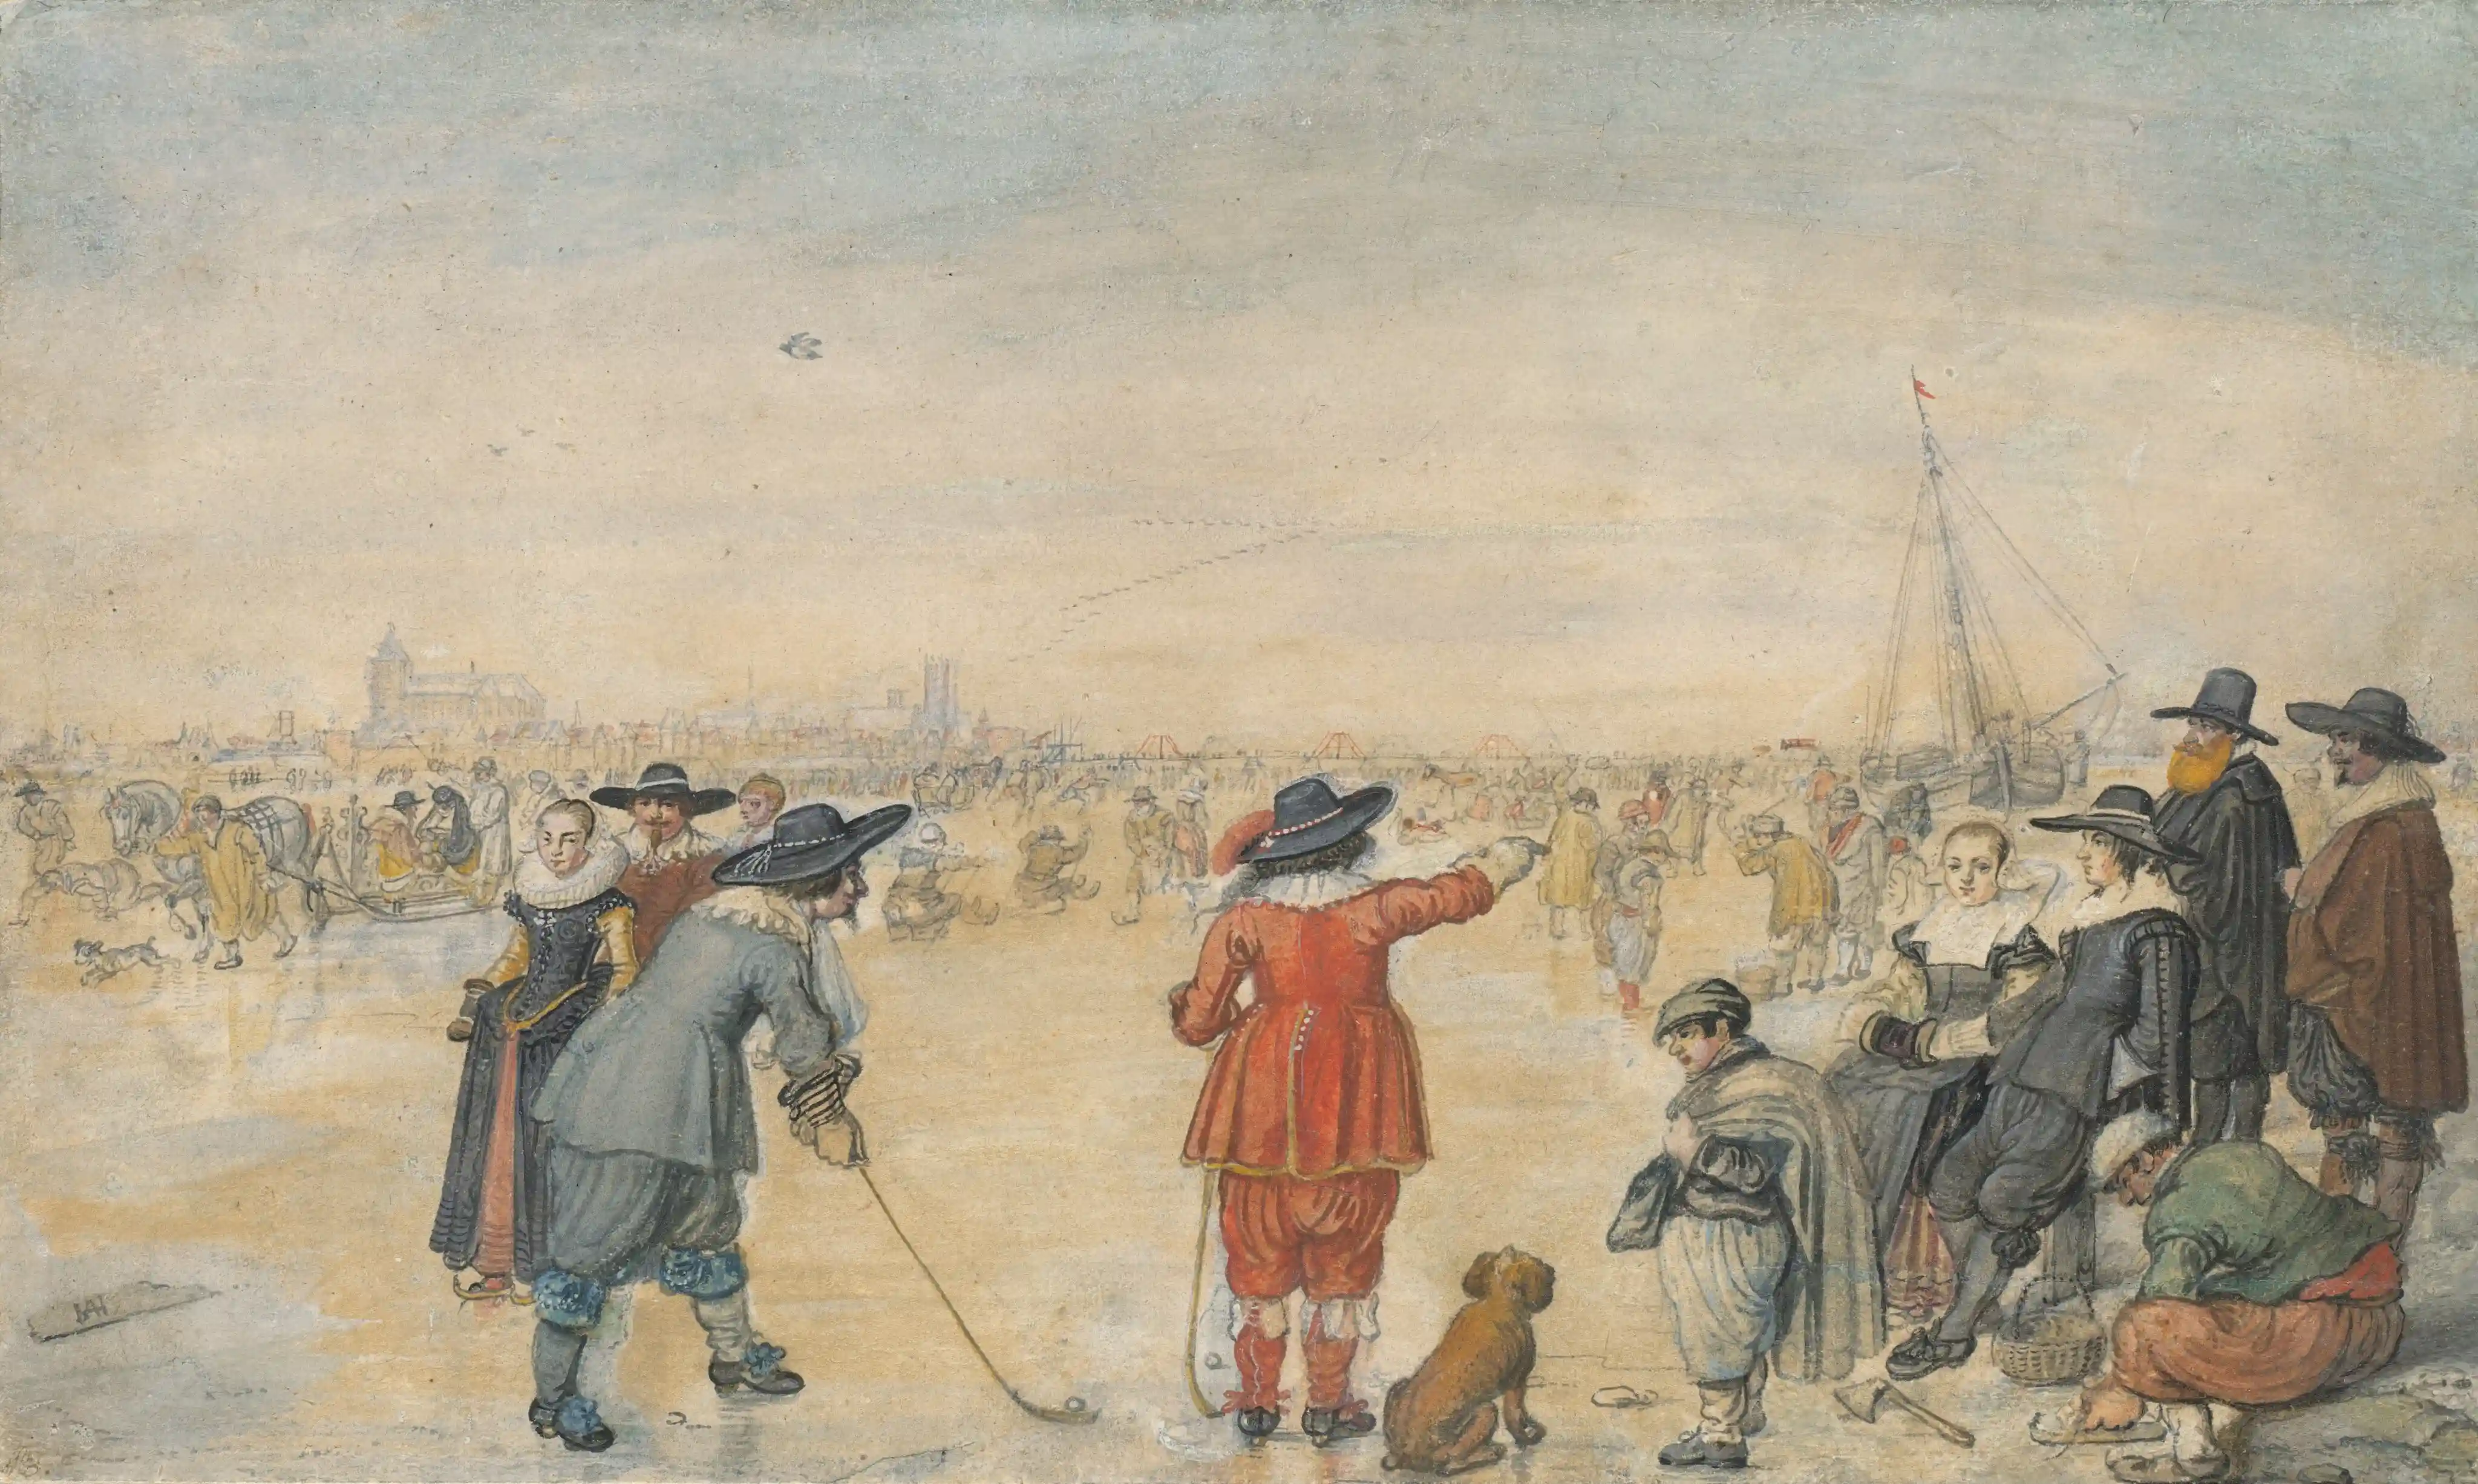 Winter Games on the Frozen River, by Hendrick Avercamp